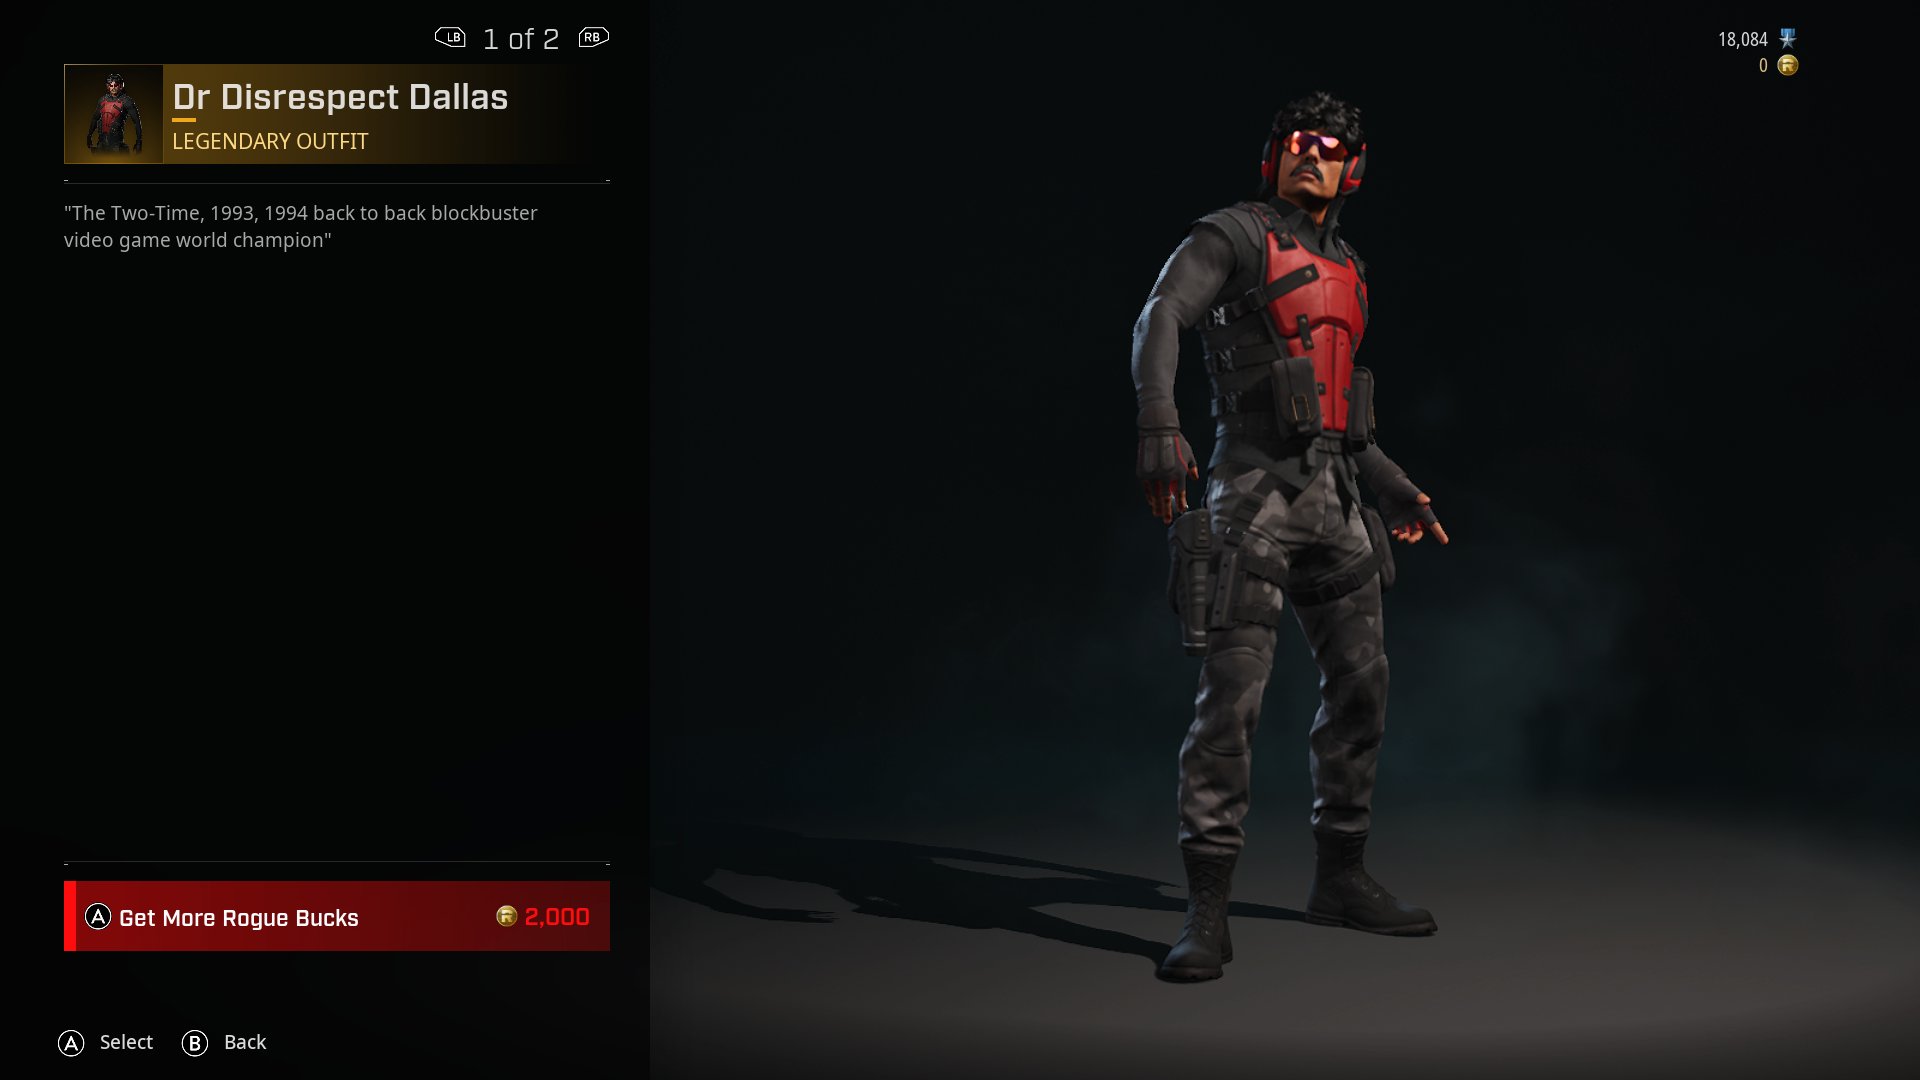 Midnight8523 on Twitter: "Rogue company dr disrespect skin https://t.co/FIAGmidbKg" / Twitter